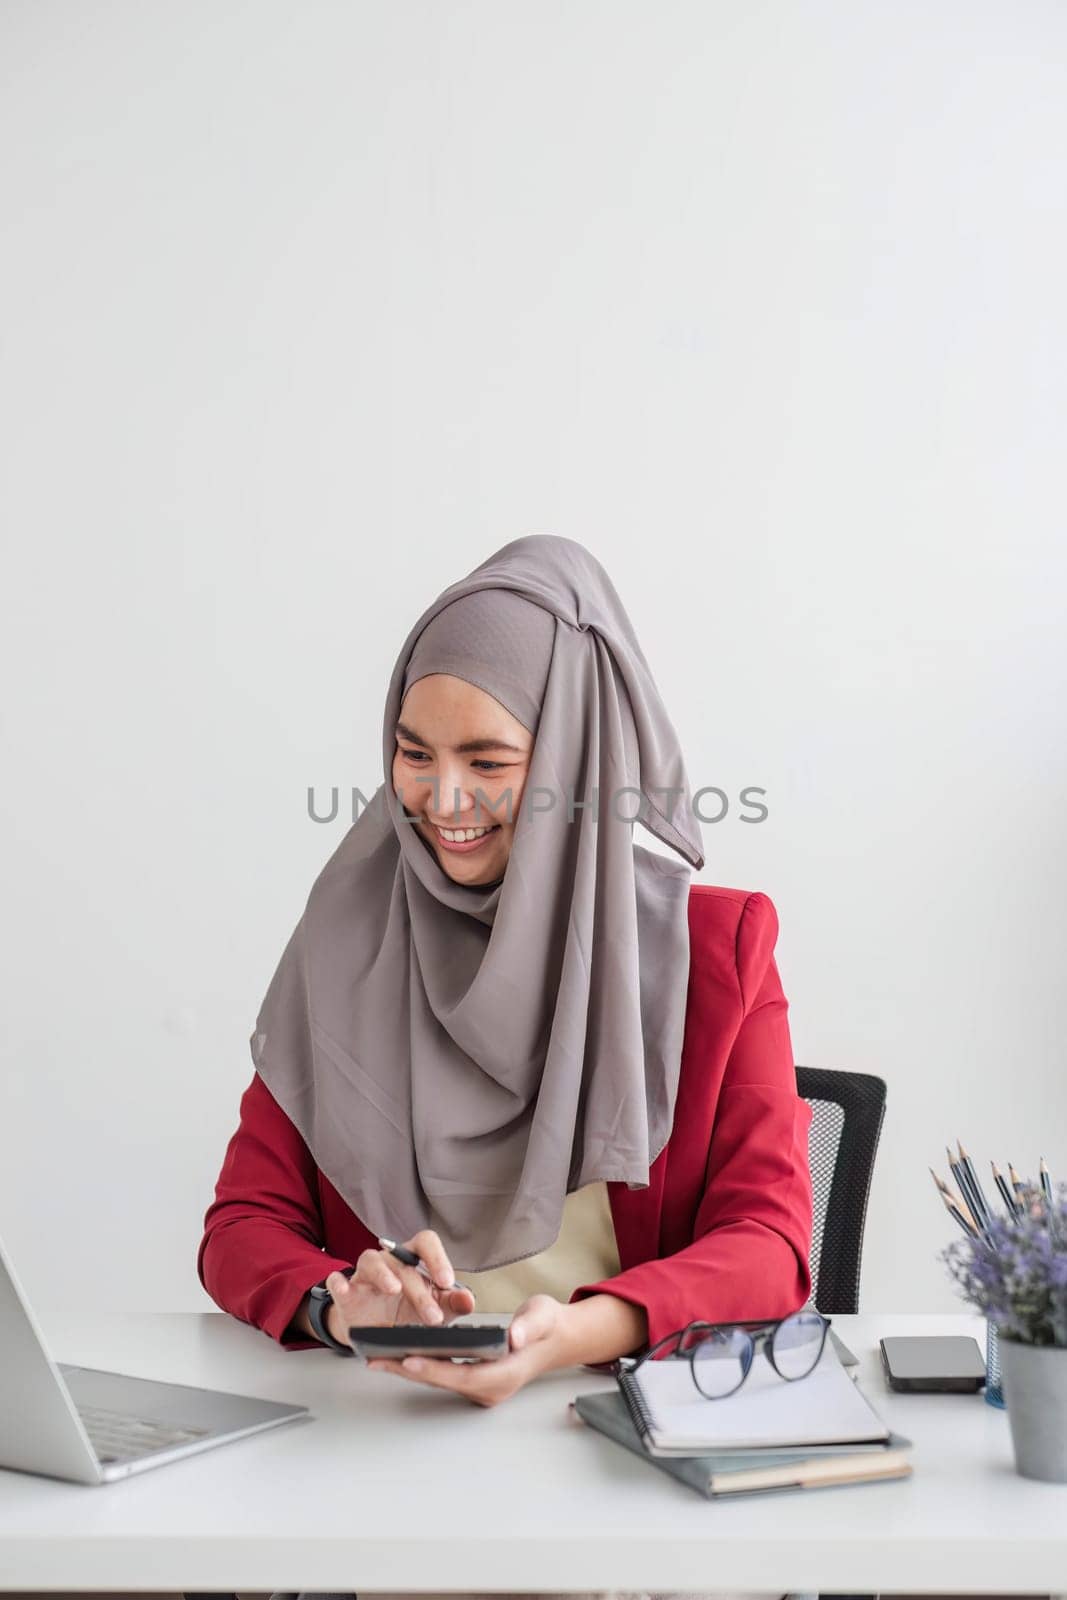 muslim businesswoman using calculator and laptop for do math finance on wooden desk in office and business working background, tax, accounting, statistics and analytic research concept